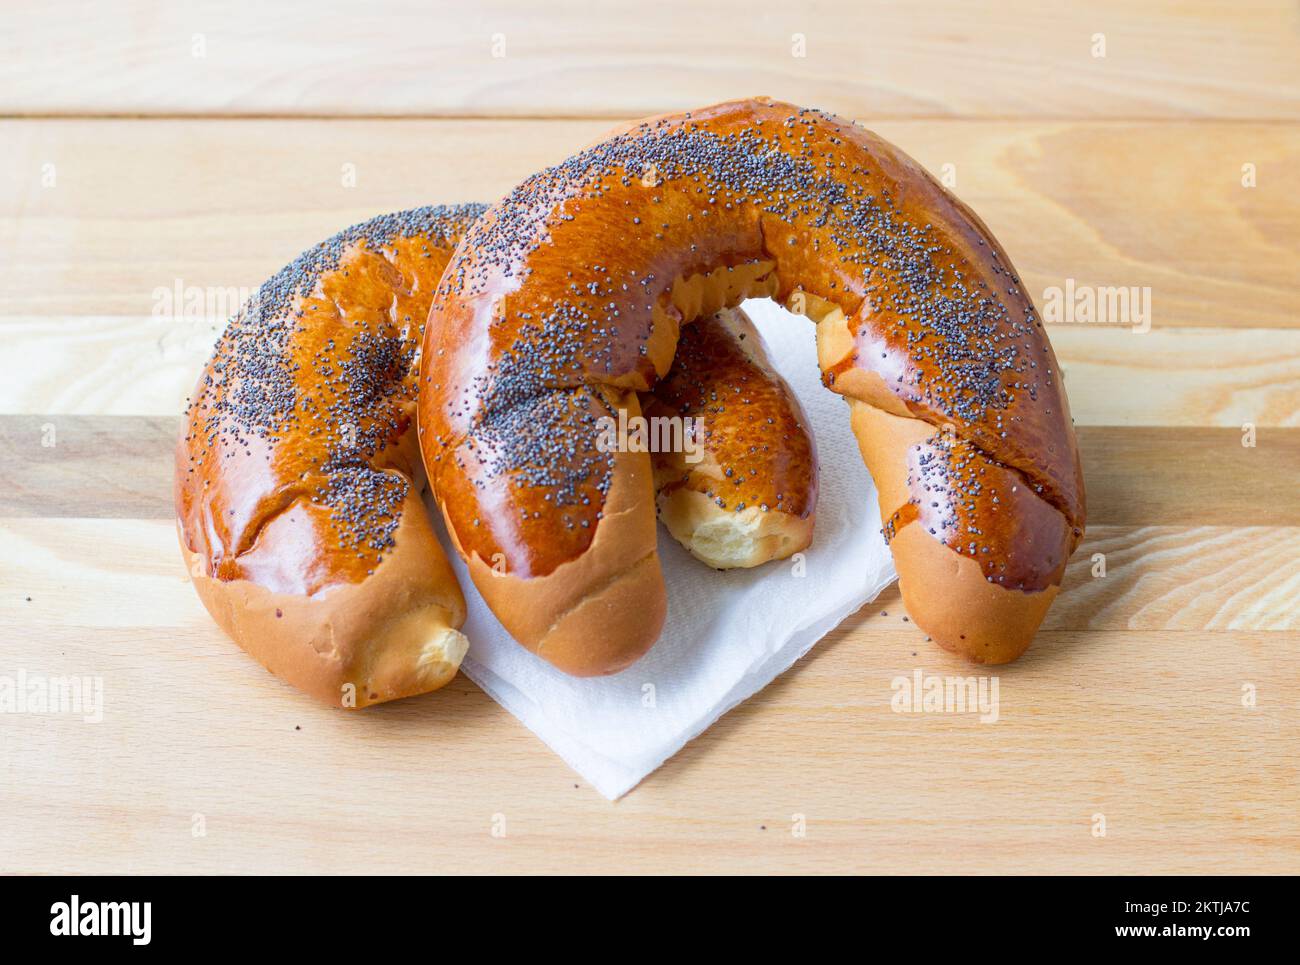 Two sweet poppy seed bread rolls called also 'makovka' Stock Photo